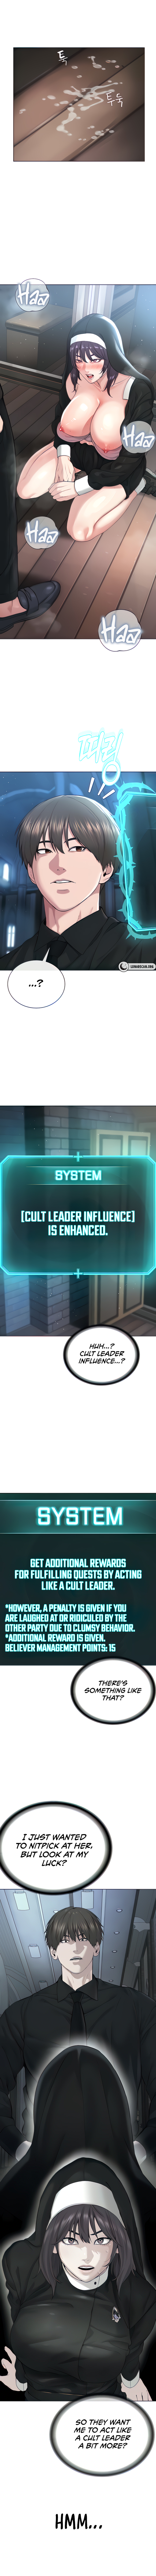 I’m The Leader Of A Cult NEW image